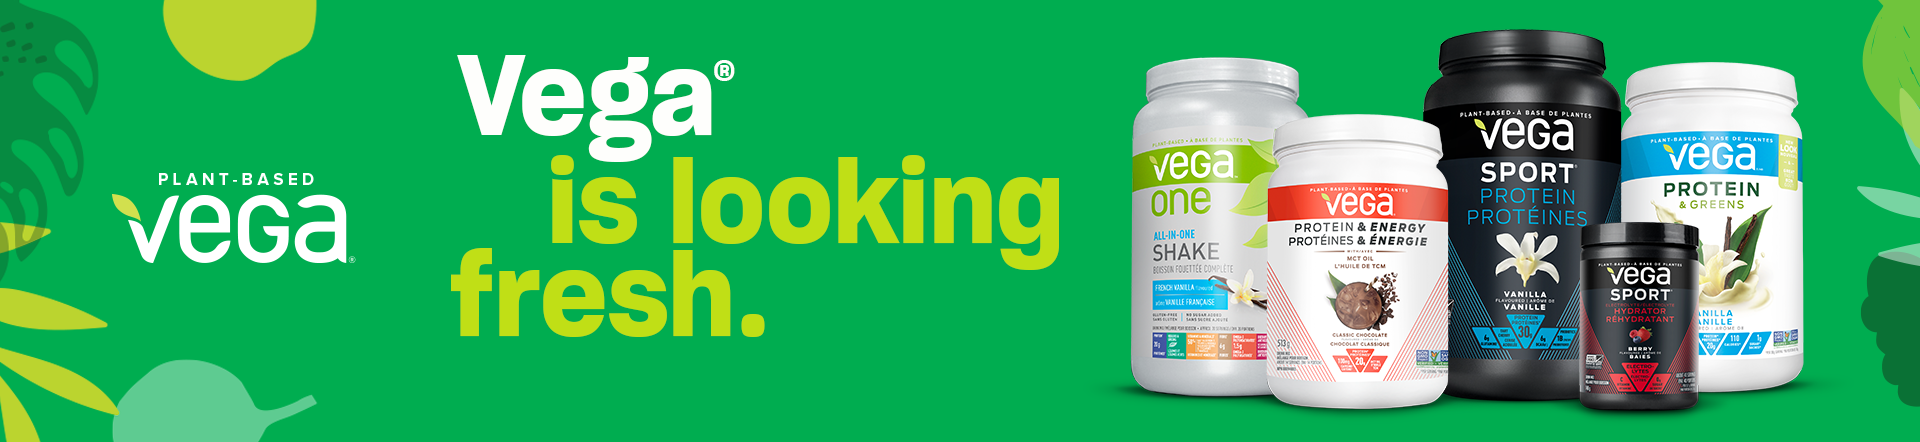 Vega Plant-Based Protein Meal Hydration Greens